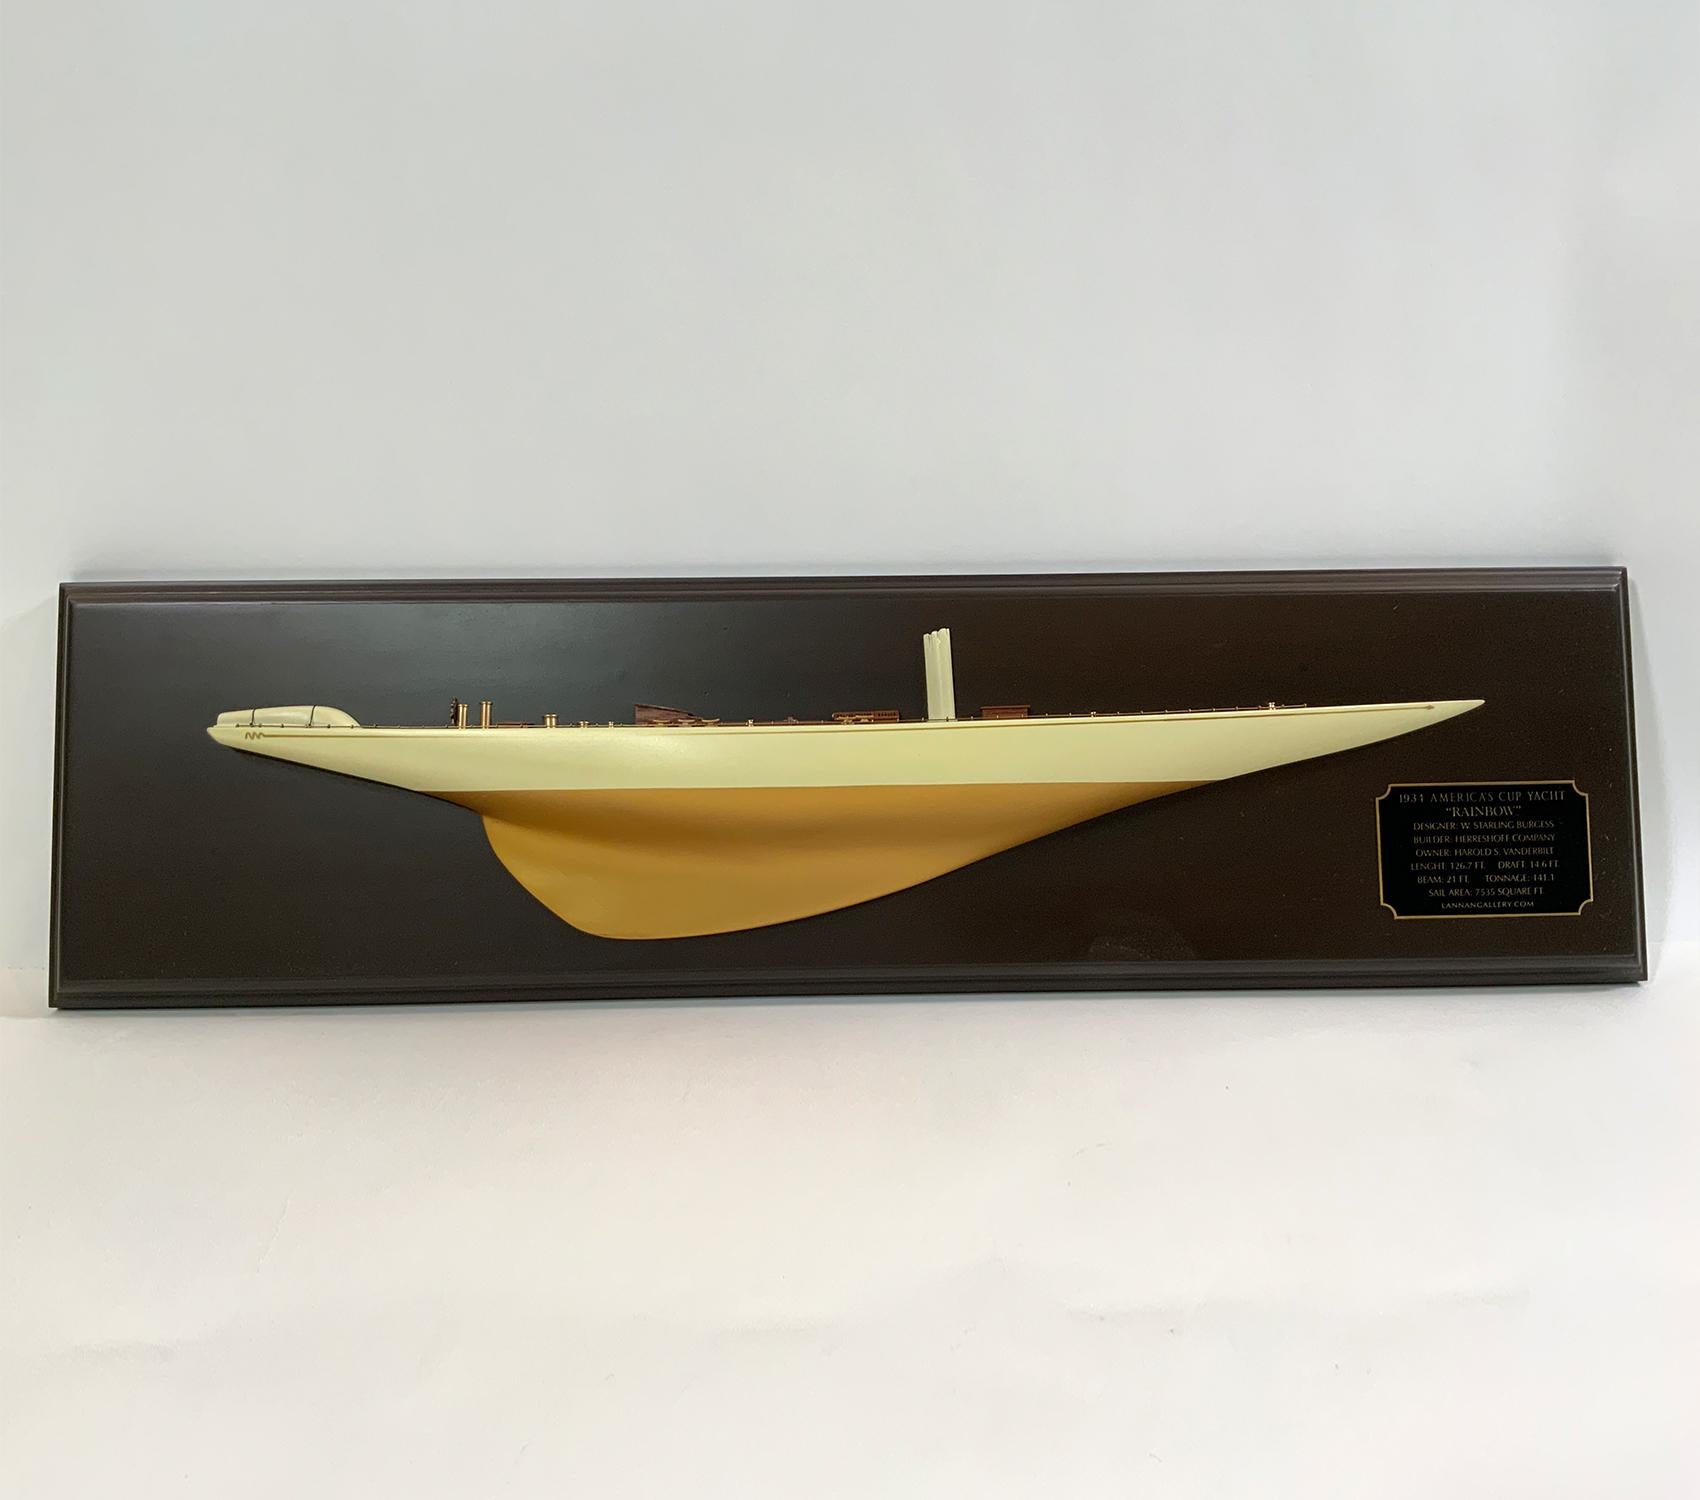 Fine half model of the 1934 America’s Cup Yacht “Rainbow”. This is the here Herreshoff Yacht that won the cup. Hull is painted white over gold. Planked deck with brass details including wheel pedestal, binnacle, compass, etc. There are skylights,